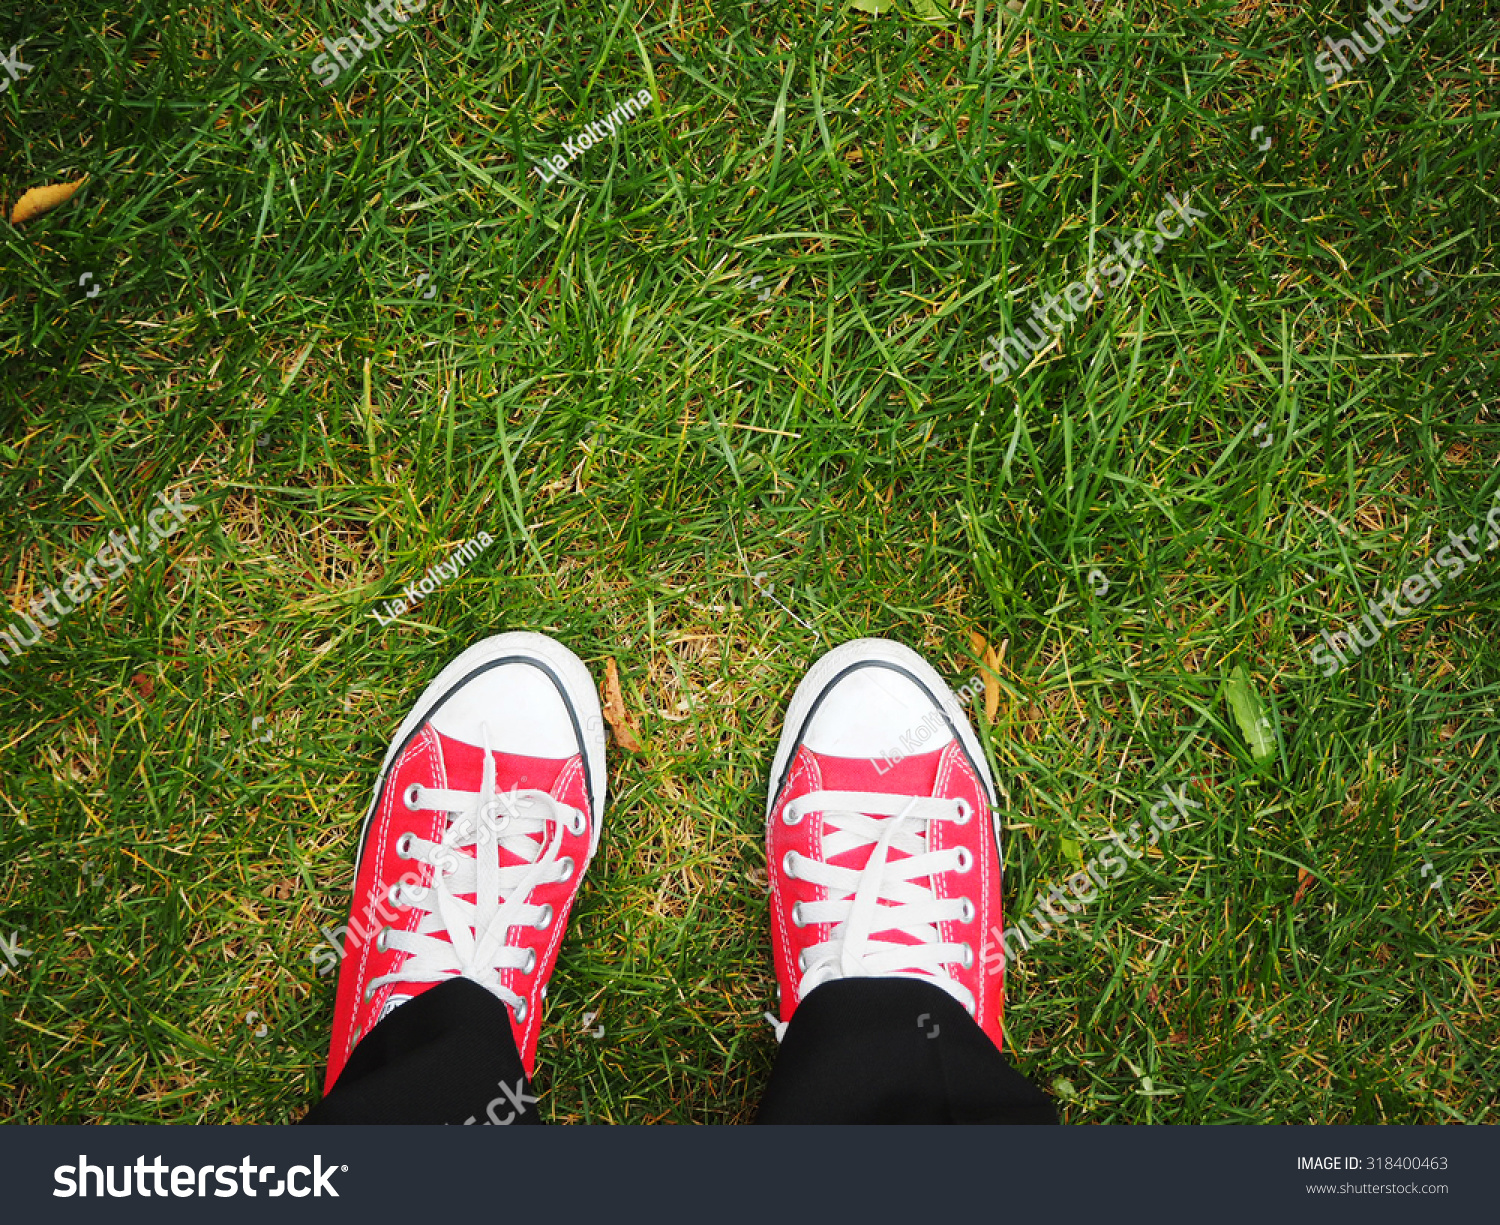 Feet in red sneakers on green grass, top view, informal style #318400463